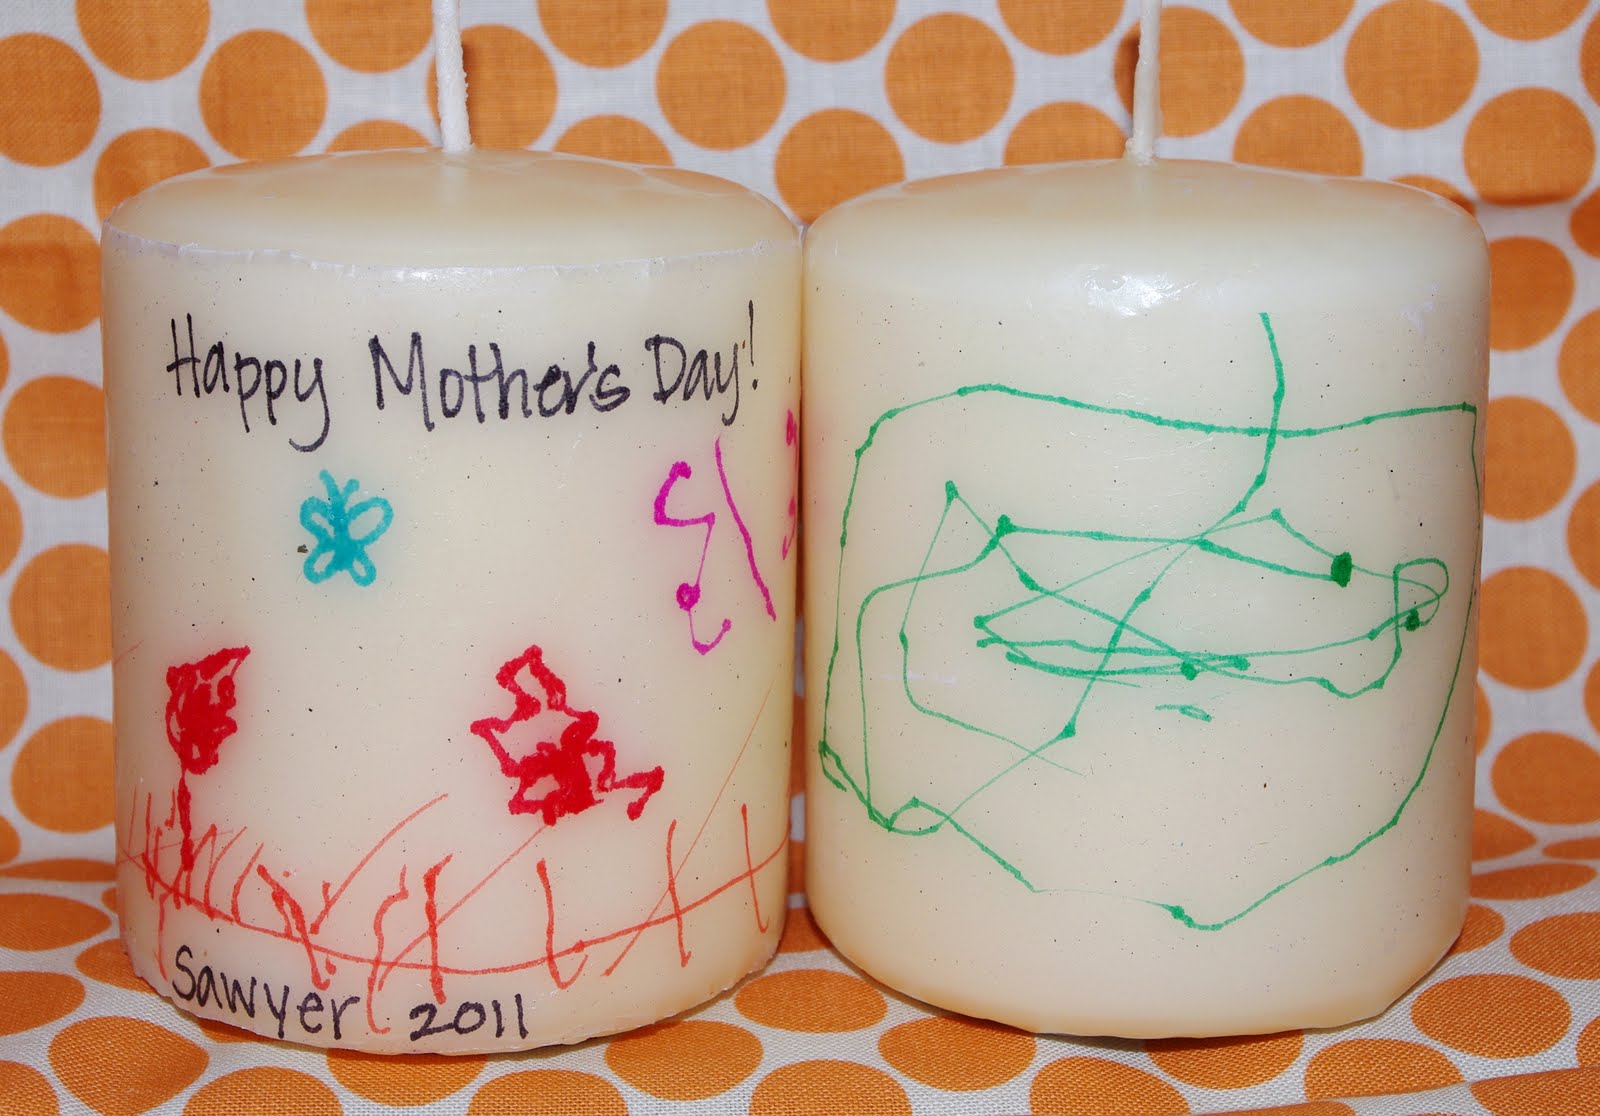 How to Make Homemade Candles for Mother's Day